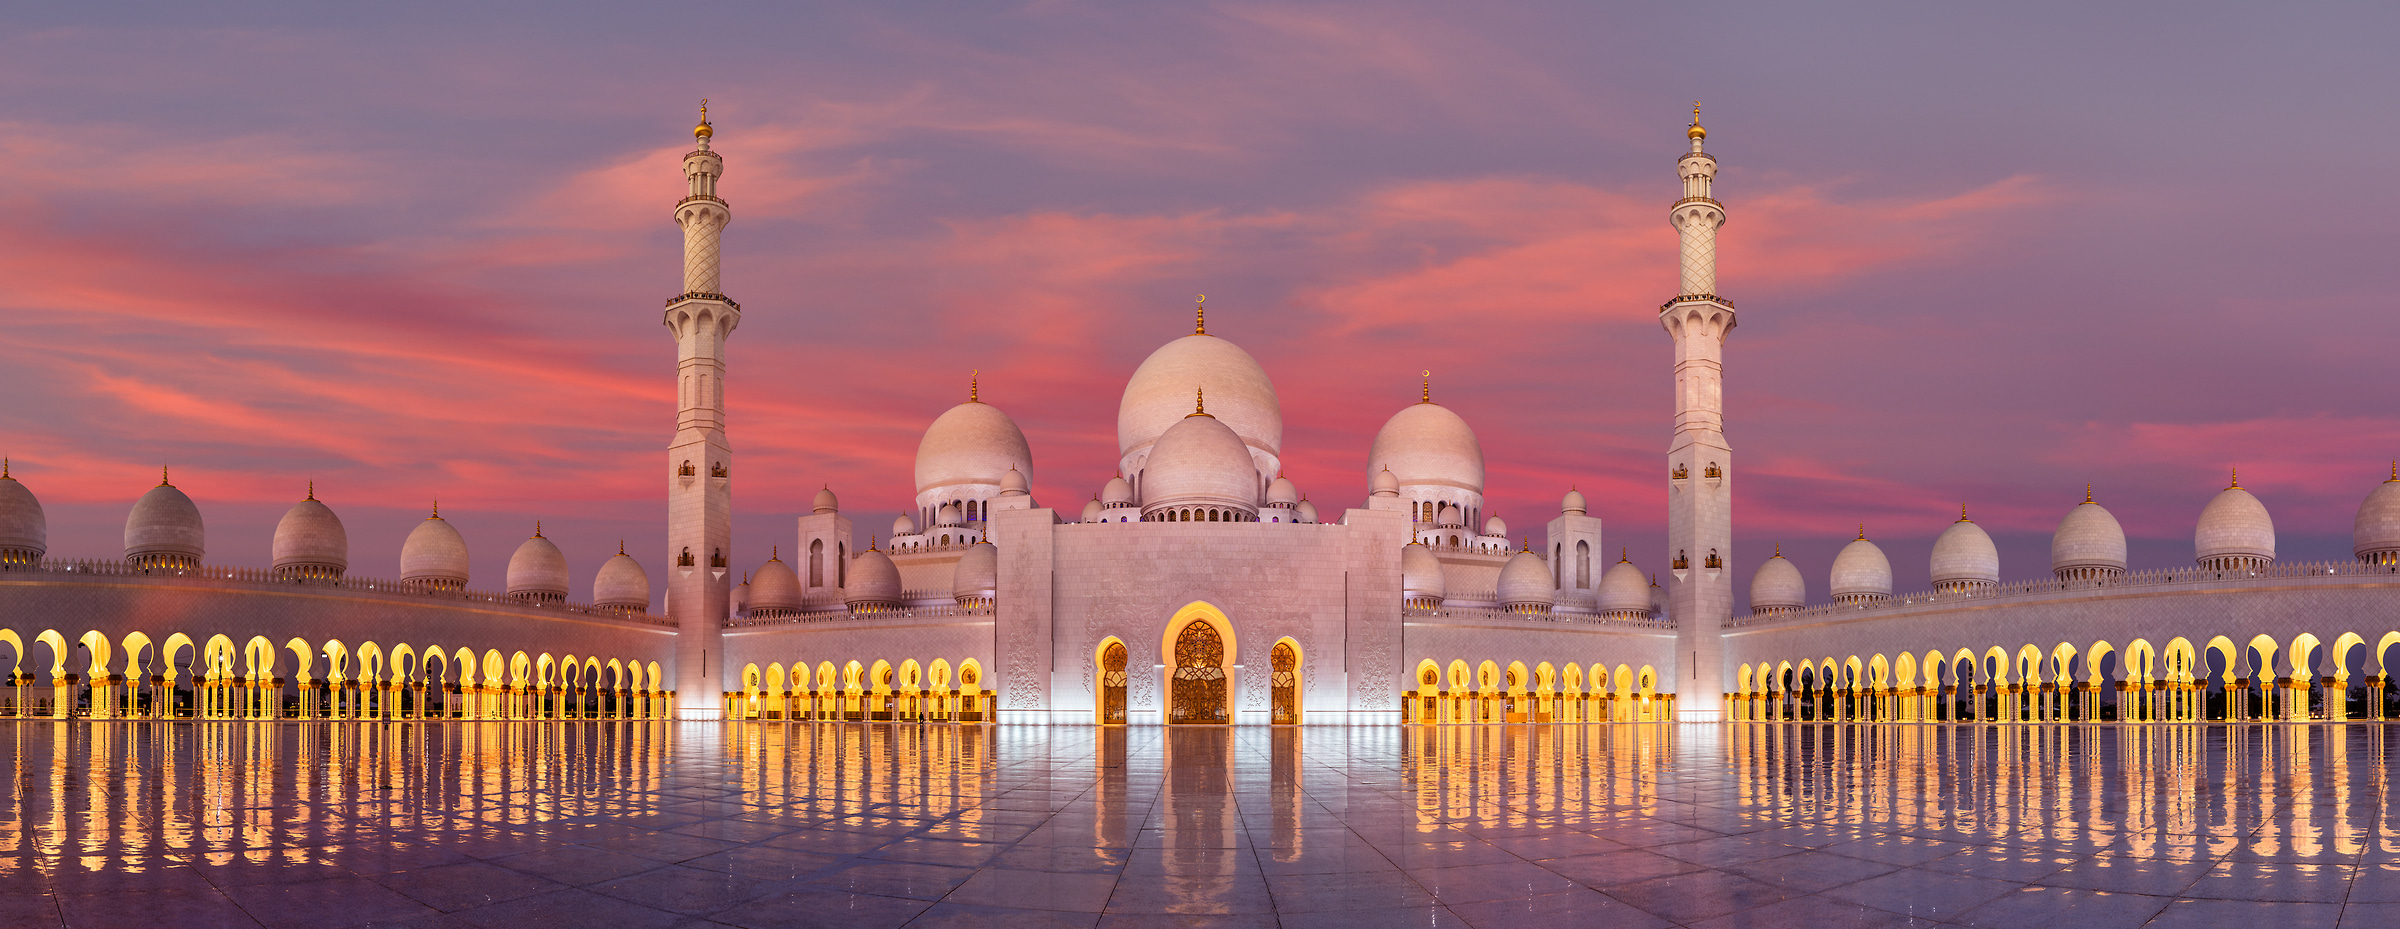 1,296 megapixels! A very high resolution, large-format photo of the Sheikh Zayed Grand Mosque in Anu Dhabi at sunrise; fine art photograph created by Chris Collacott in the United Arab Emirates.